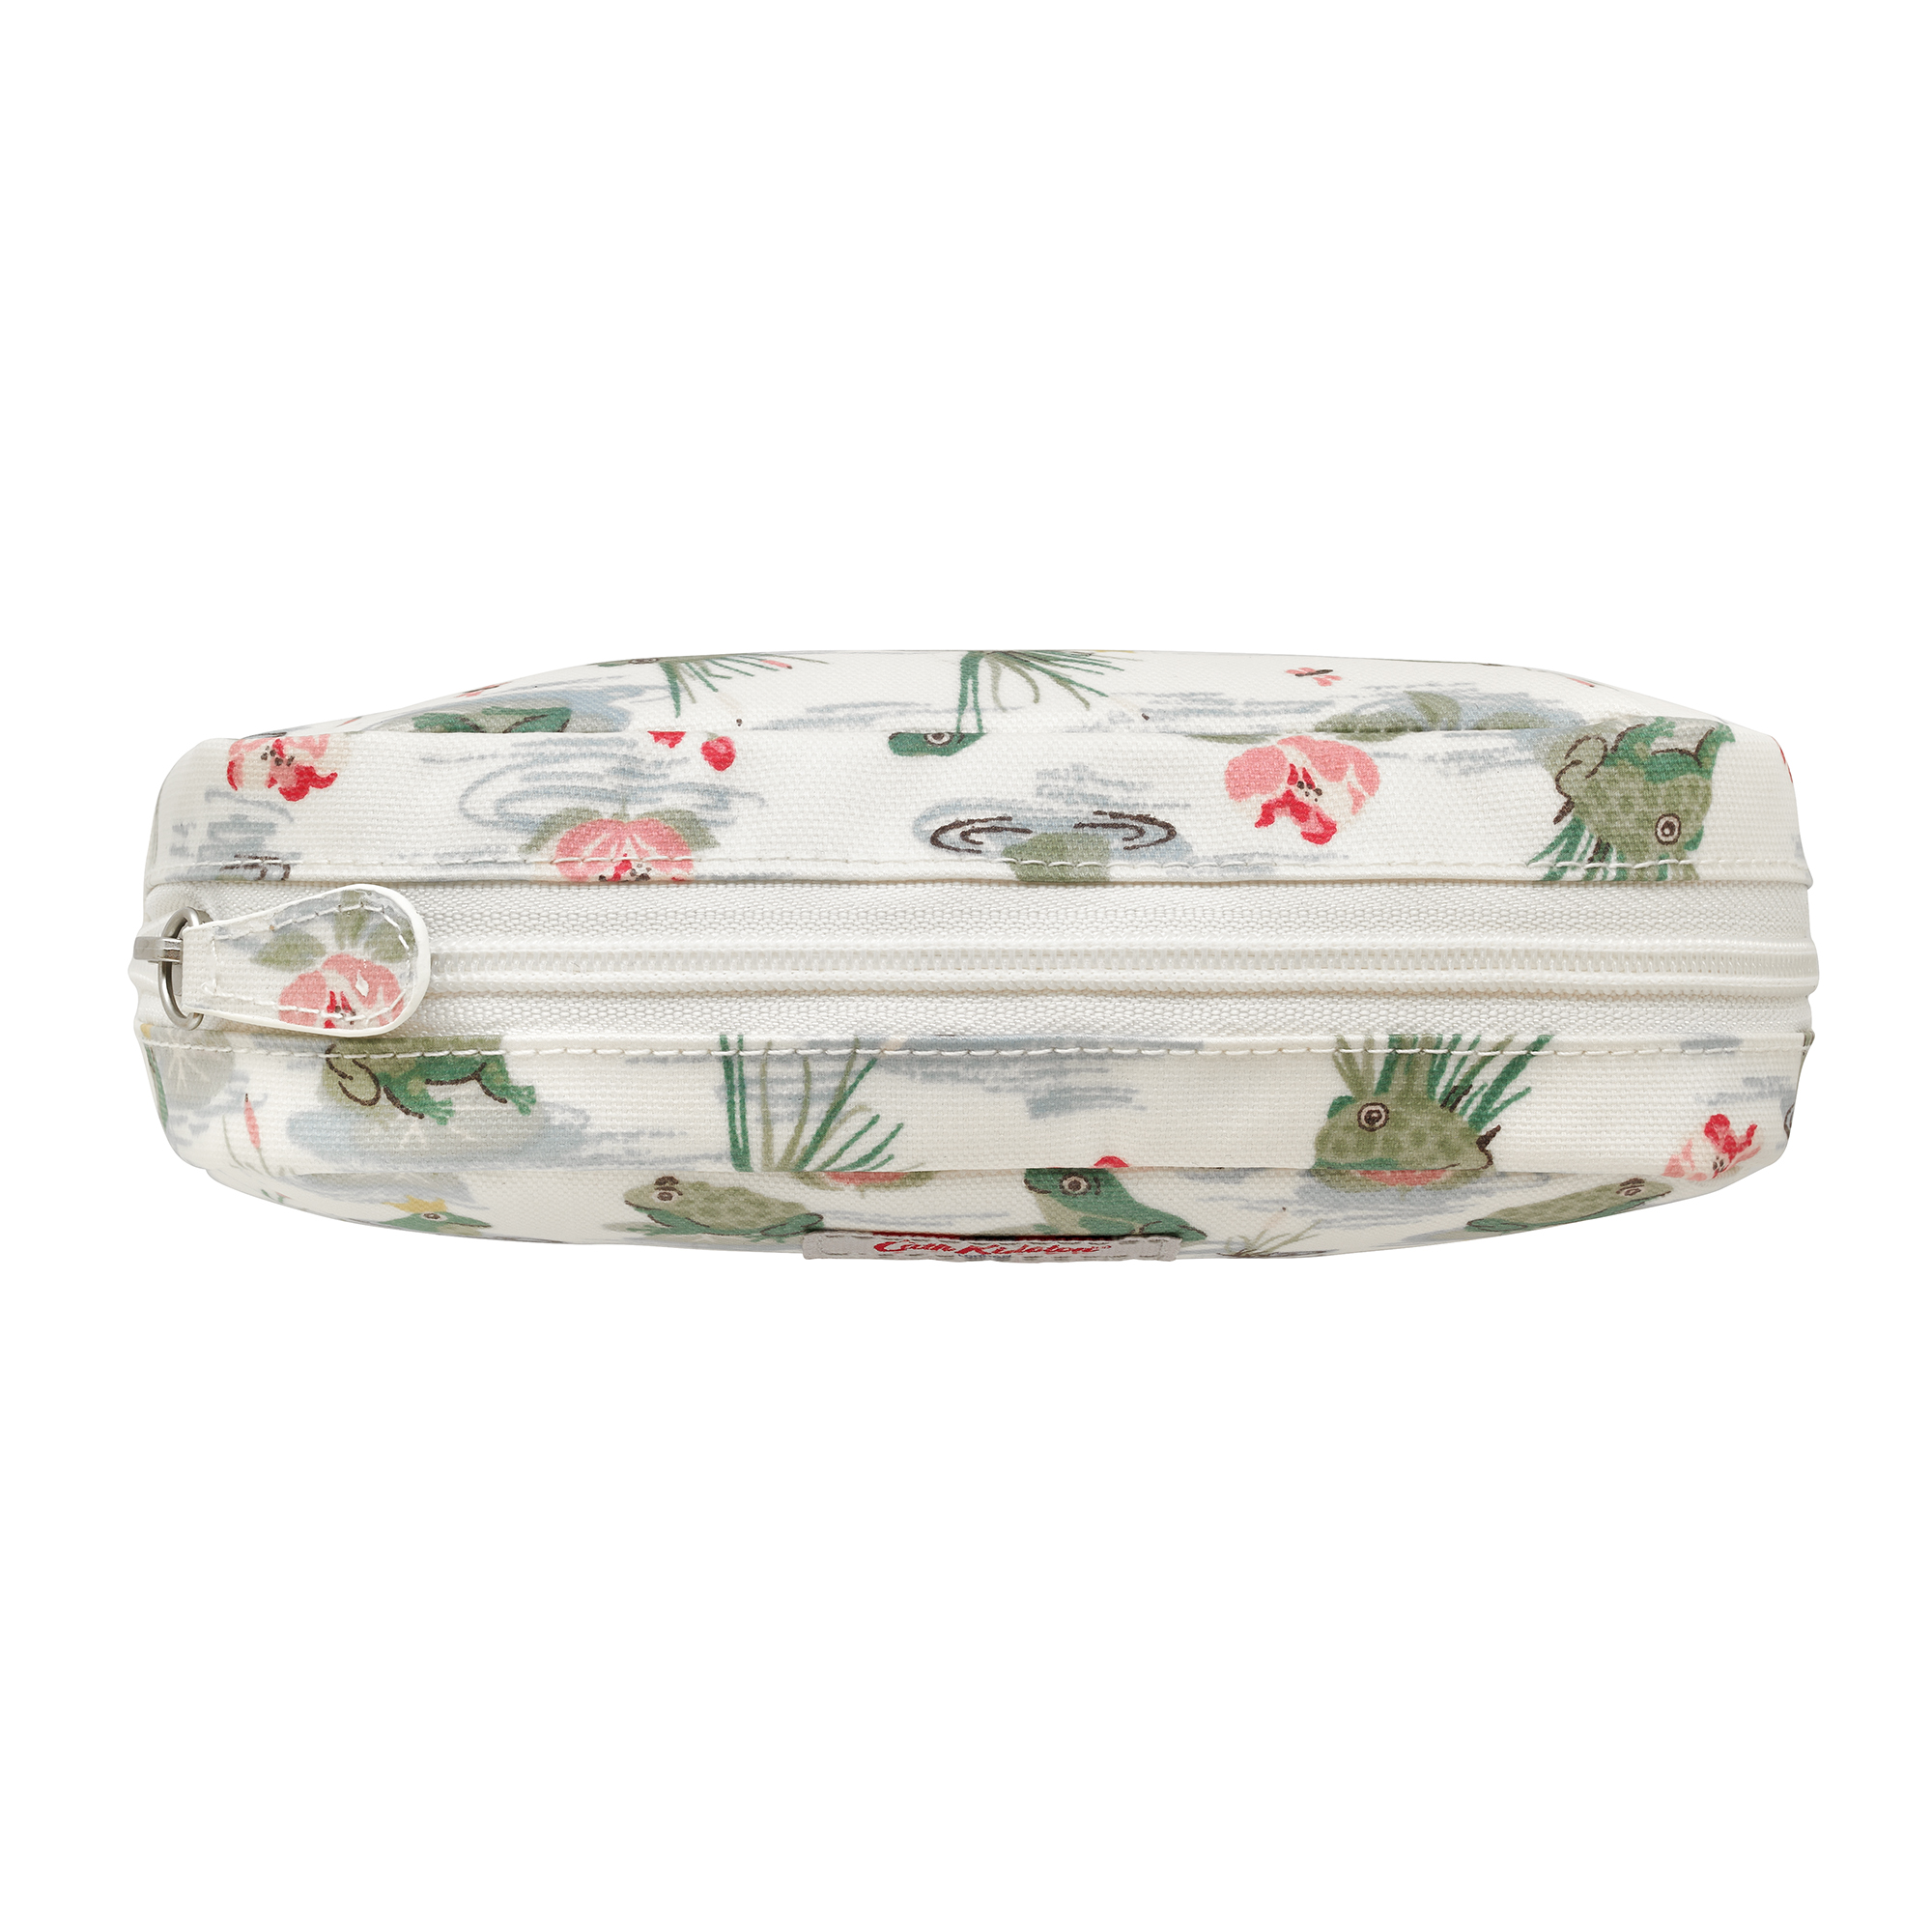 Hộp bút Cath Kidston họa tiết Bathing Frogs (Pencil Case with Pocket Bathing Frogs)